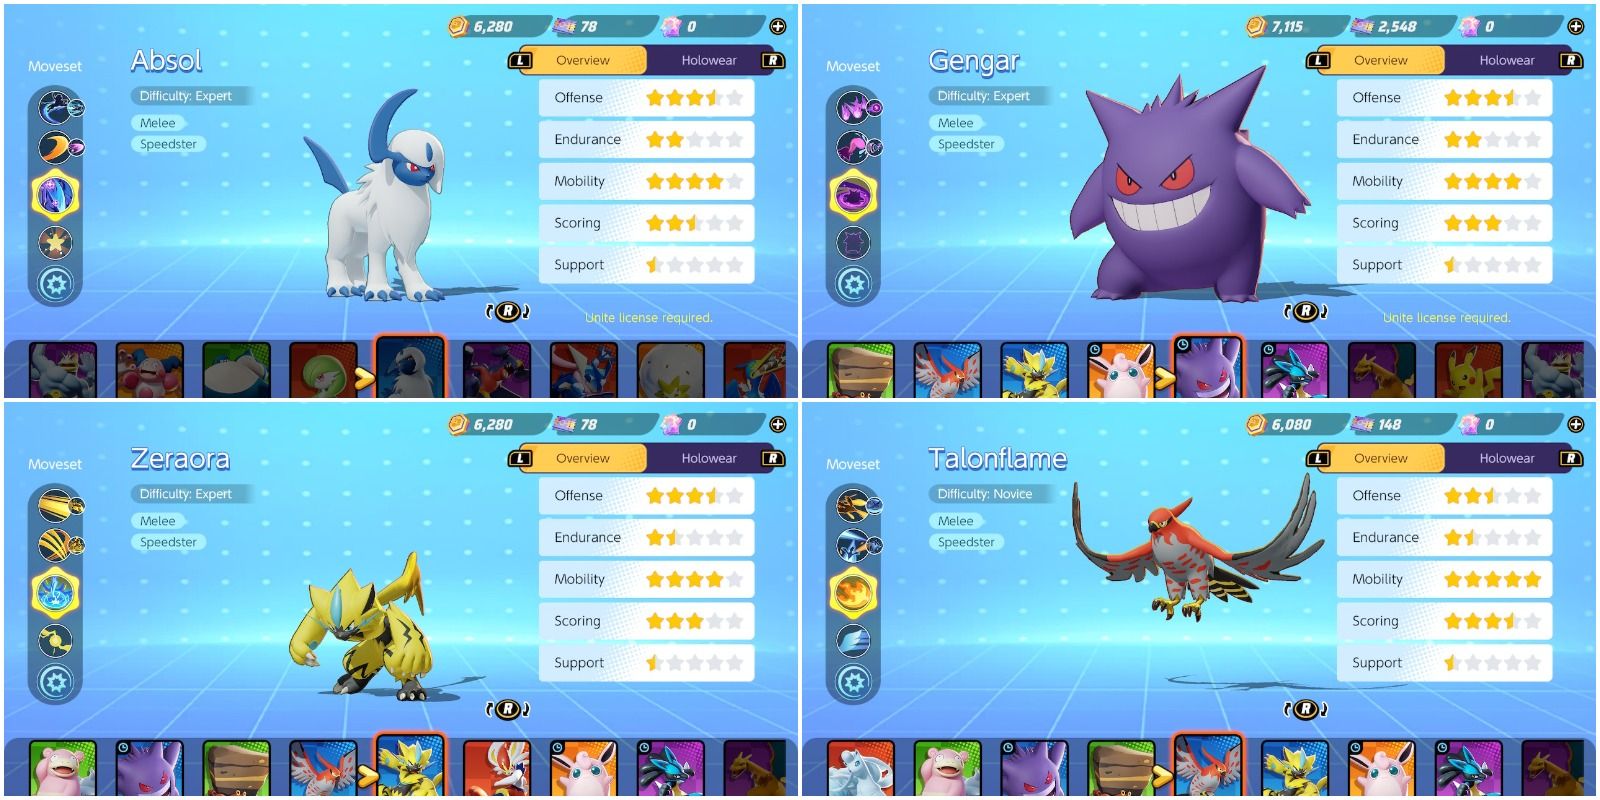 Feature Duab Pokemon Unite All Speedsters Guide